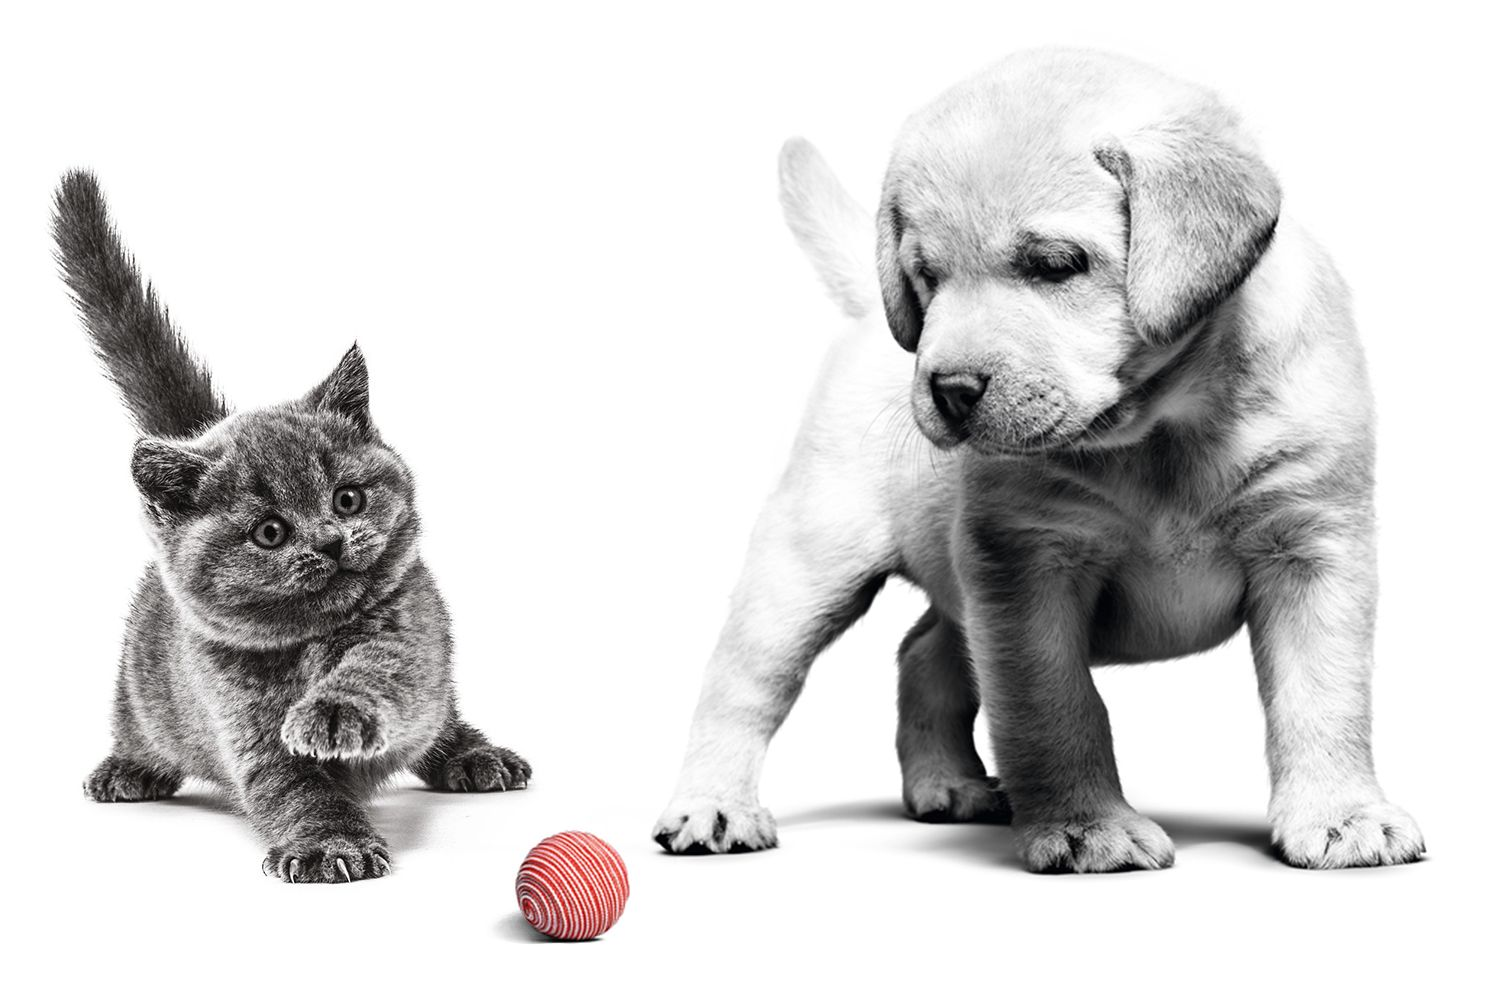 Puppy and kitten playing with red ball